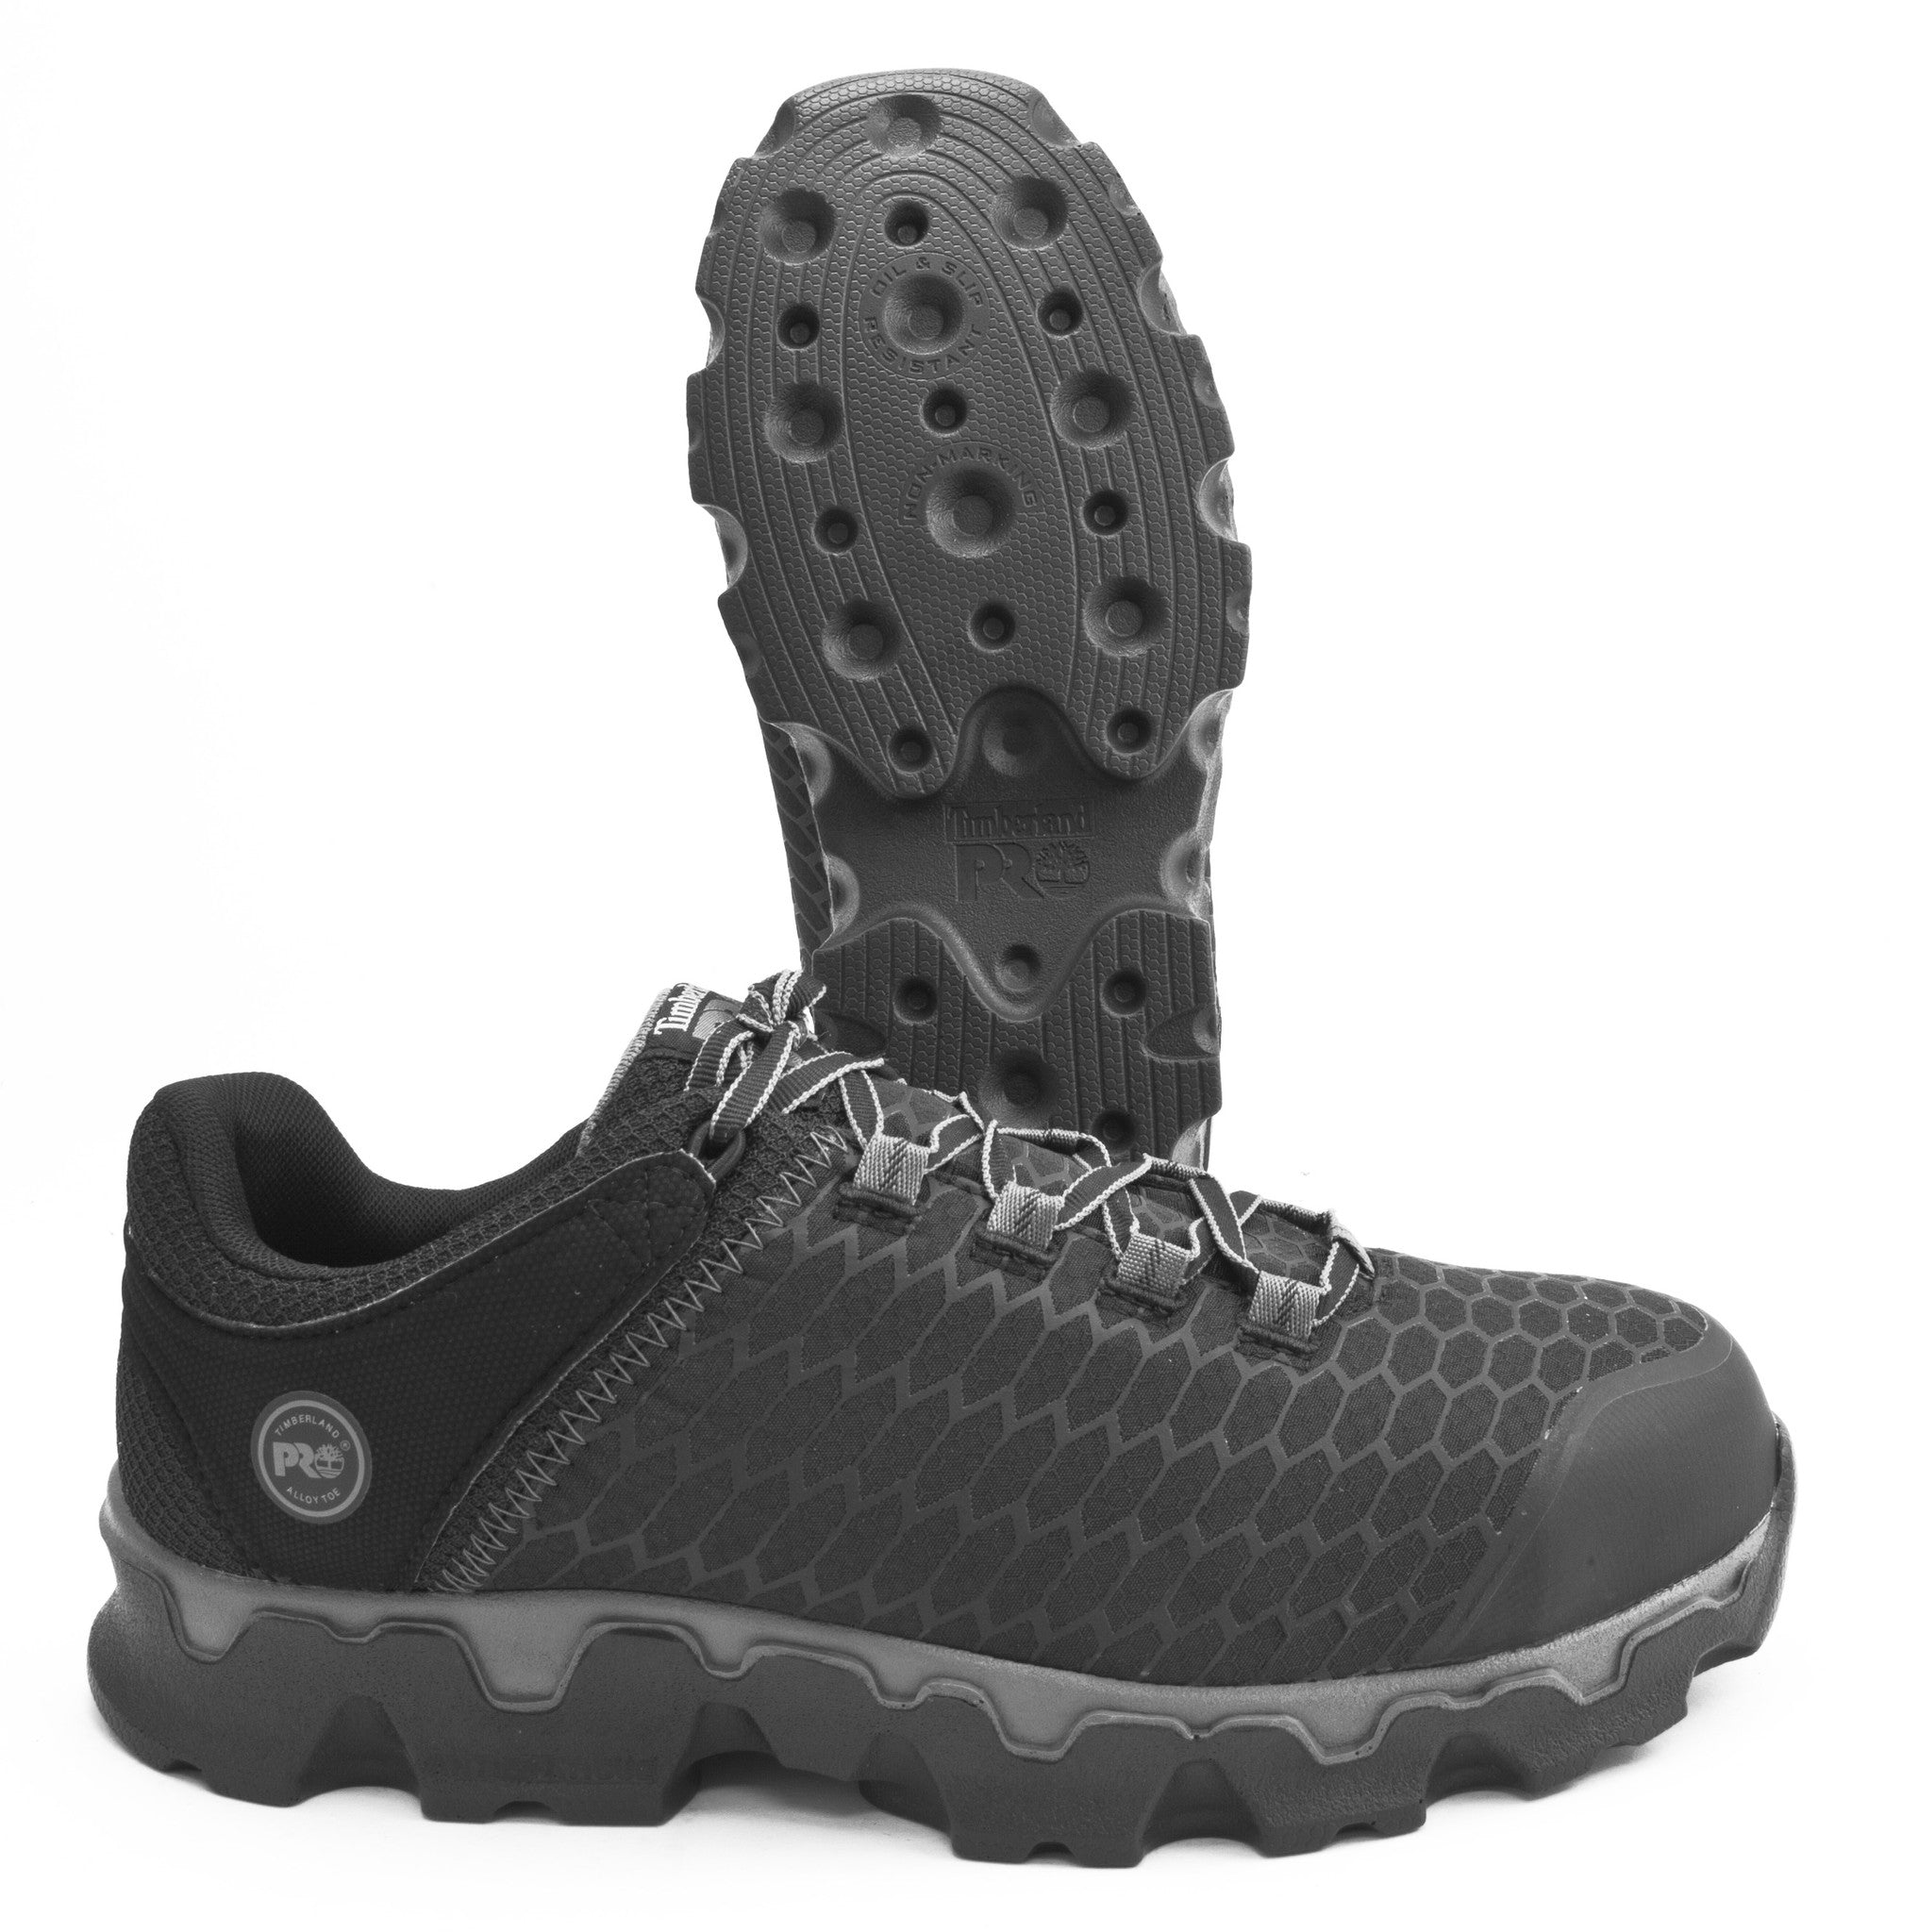 Timberland PRO Powertrain Sport TB0A176A001, Non-Marking OR SR AT EH Athletic Shoe